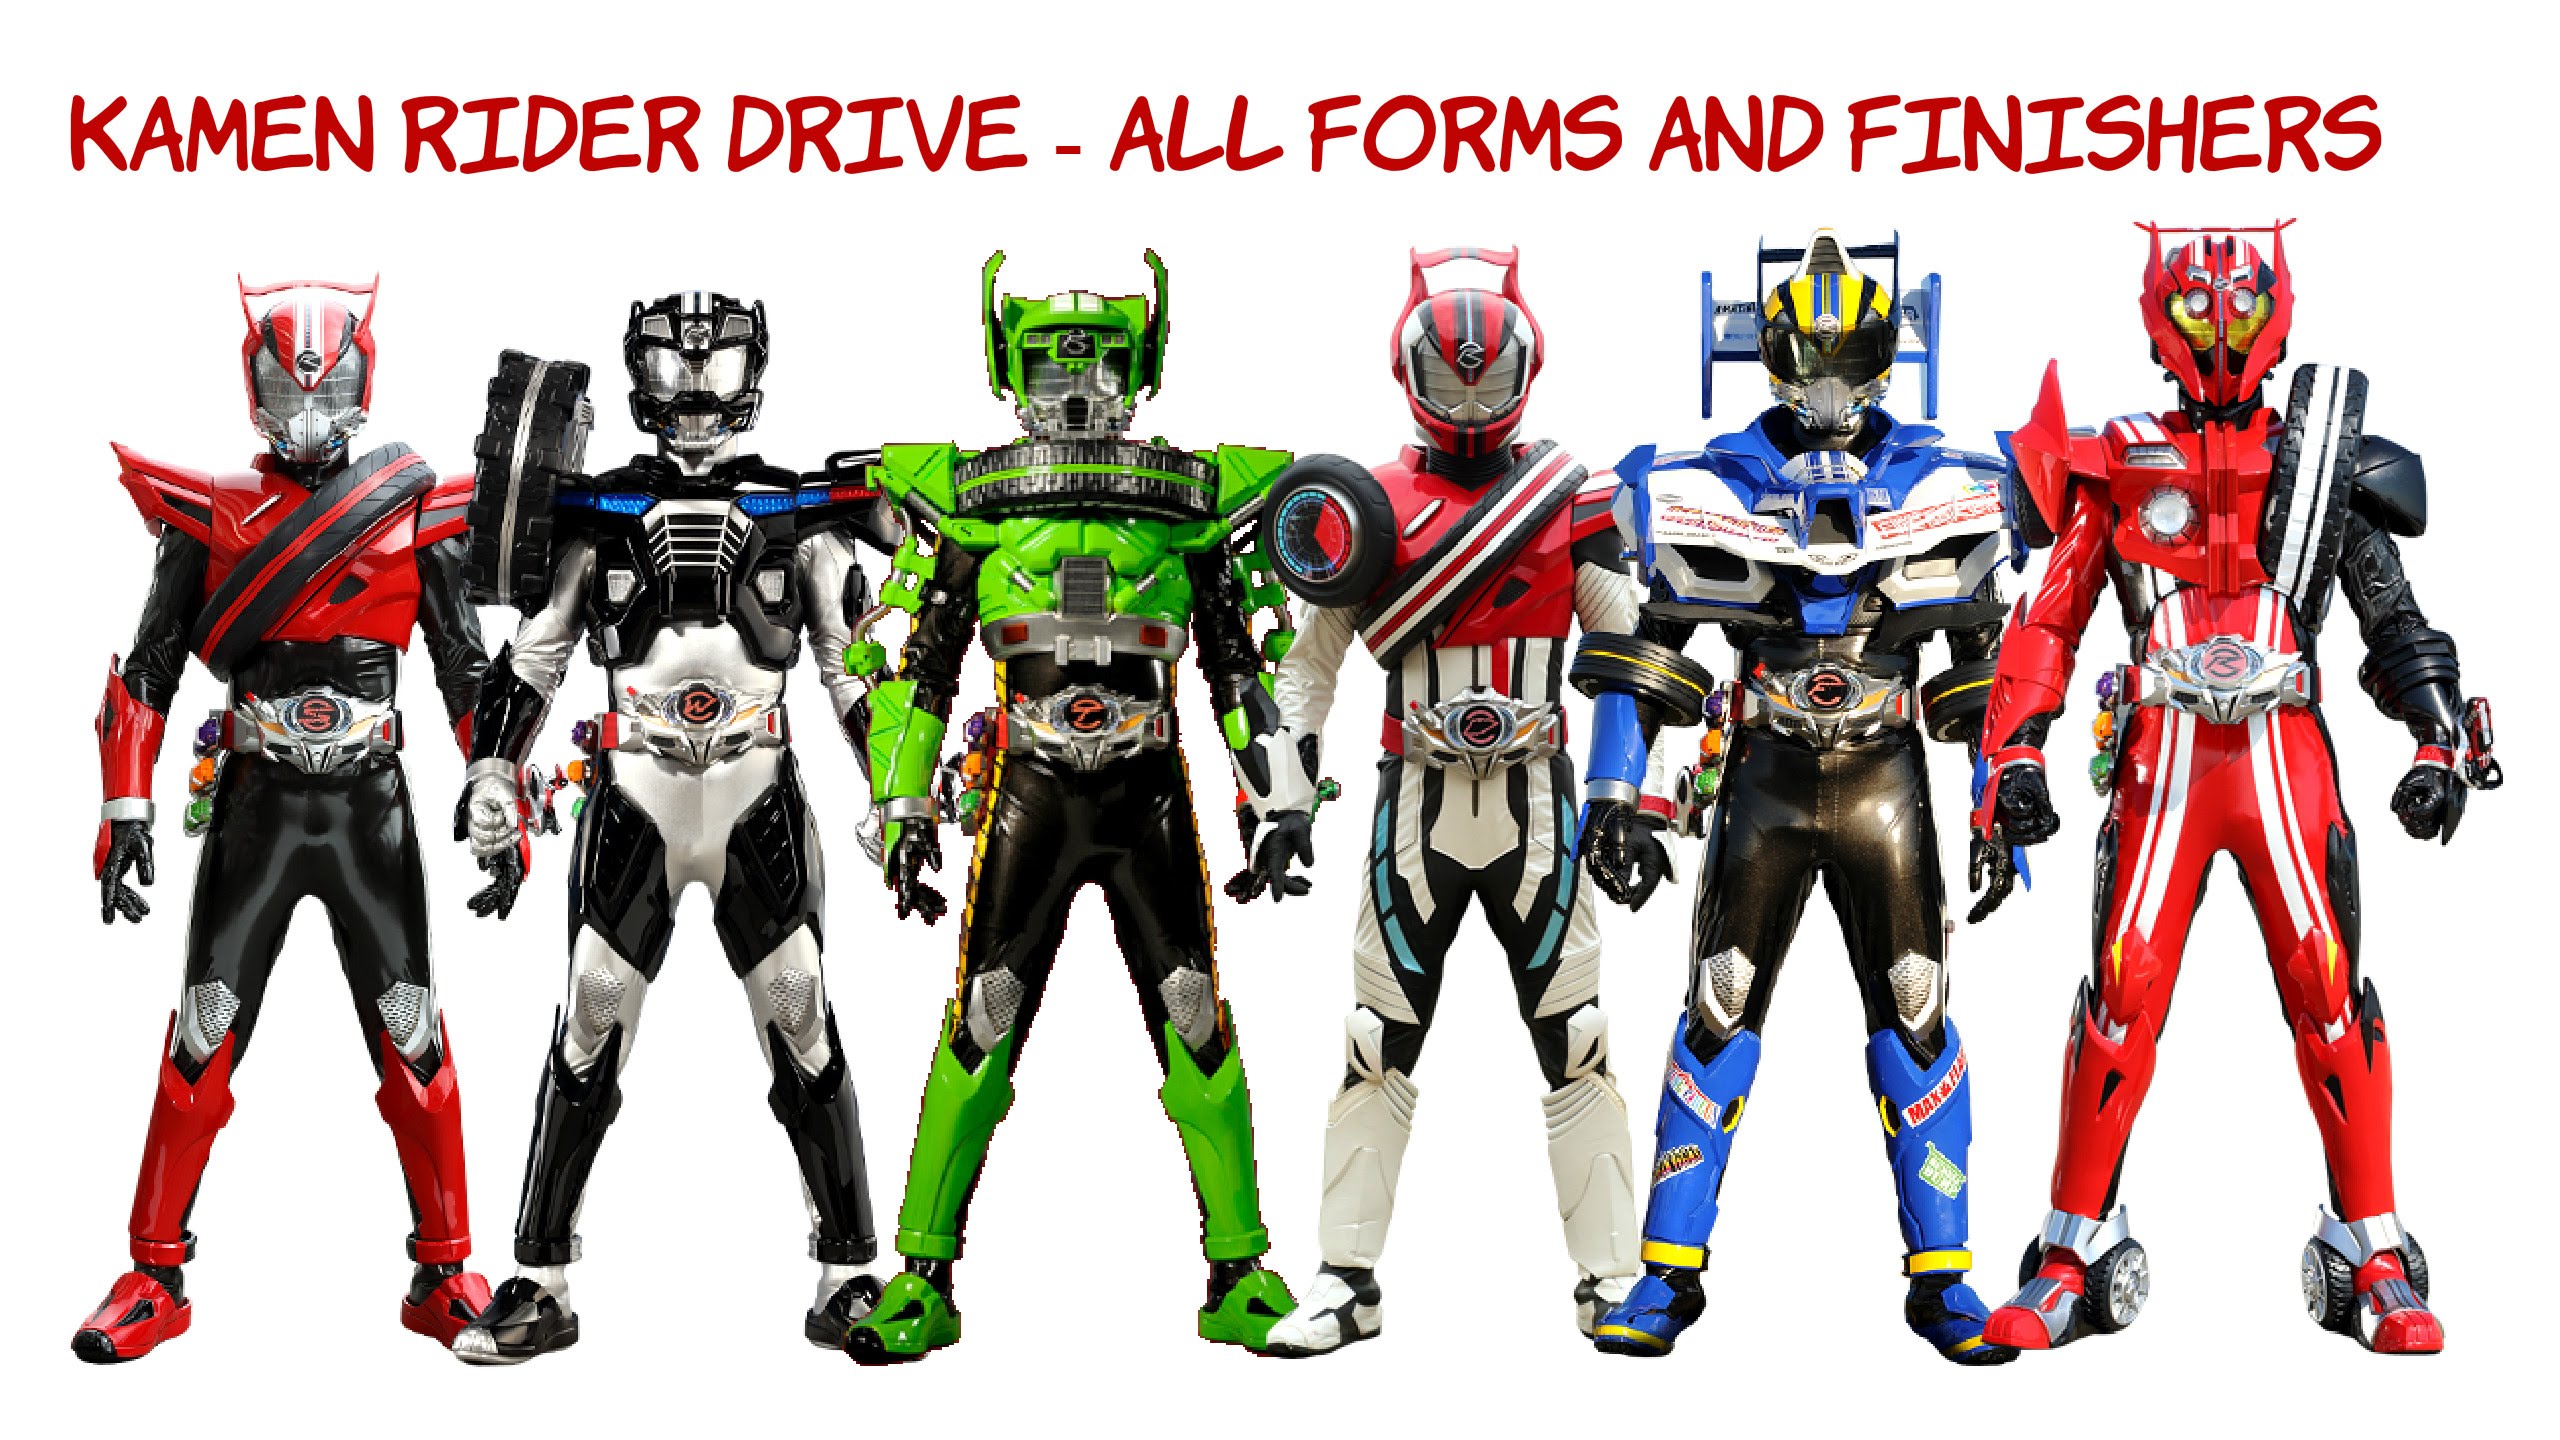 Kamen Rider Drive - All Forms, Abilities, and Finishers - YouTube